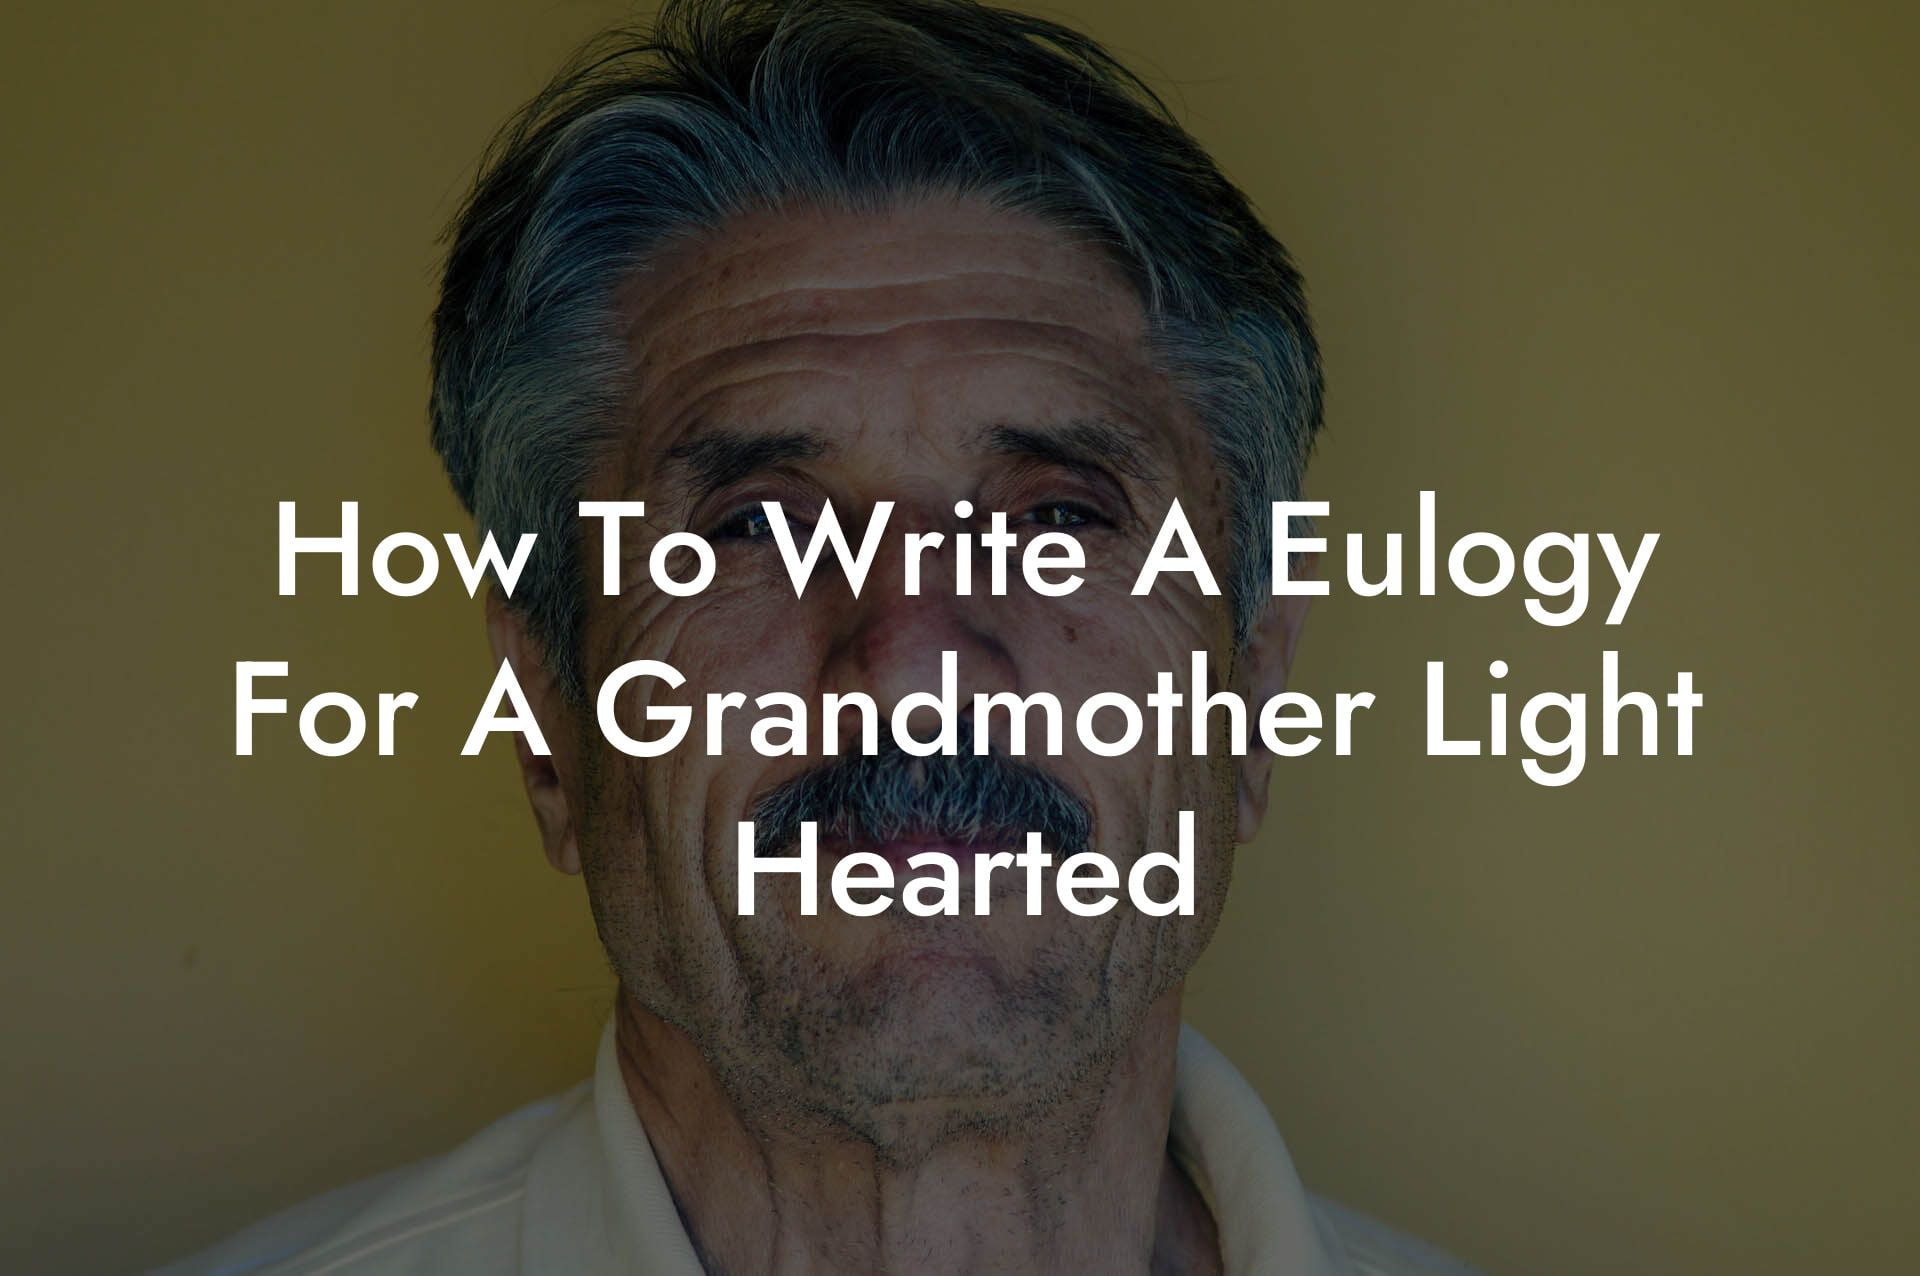 How To Write A Eulogy For A Grandmother Light Hearted